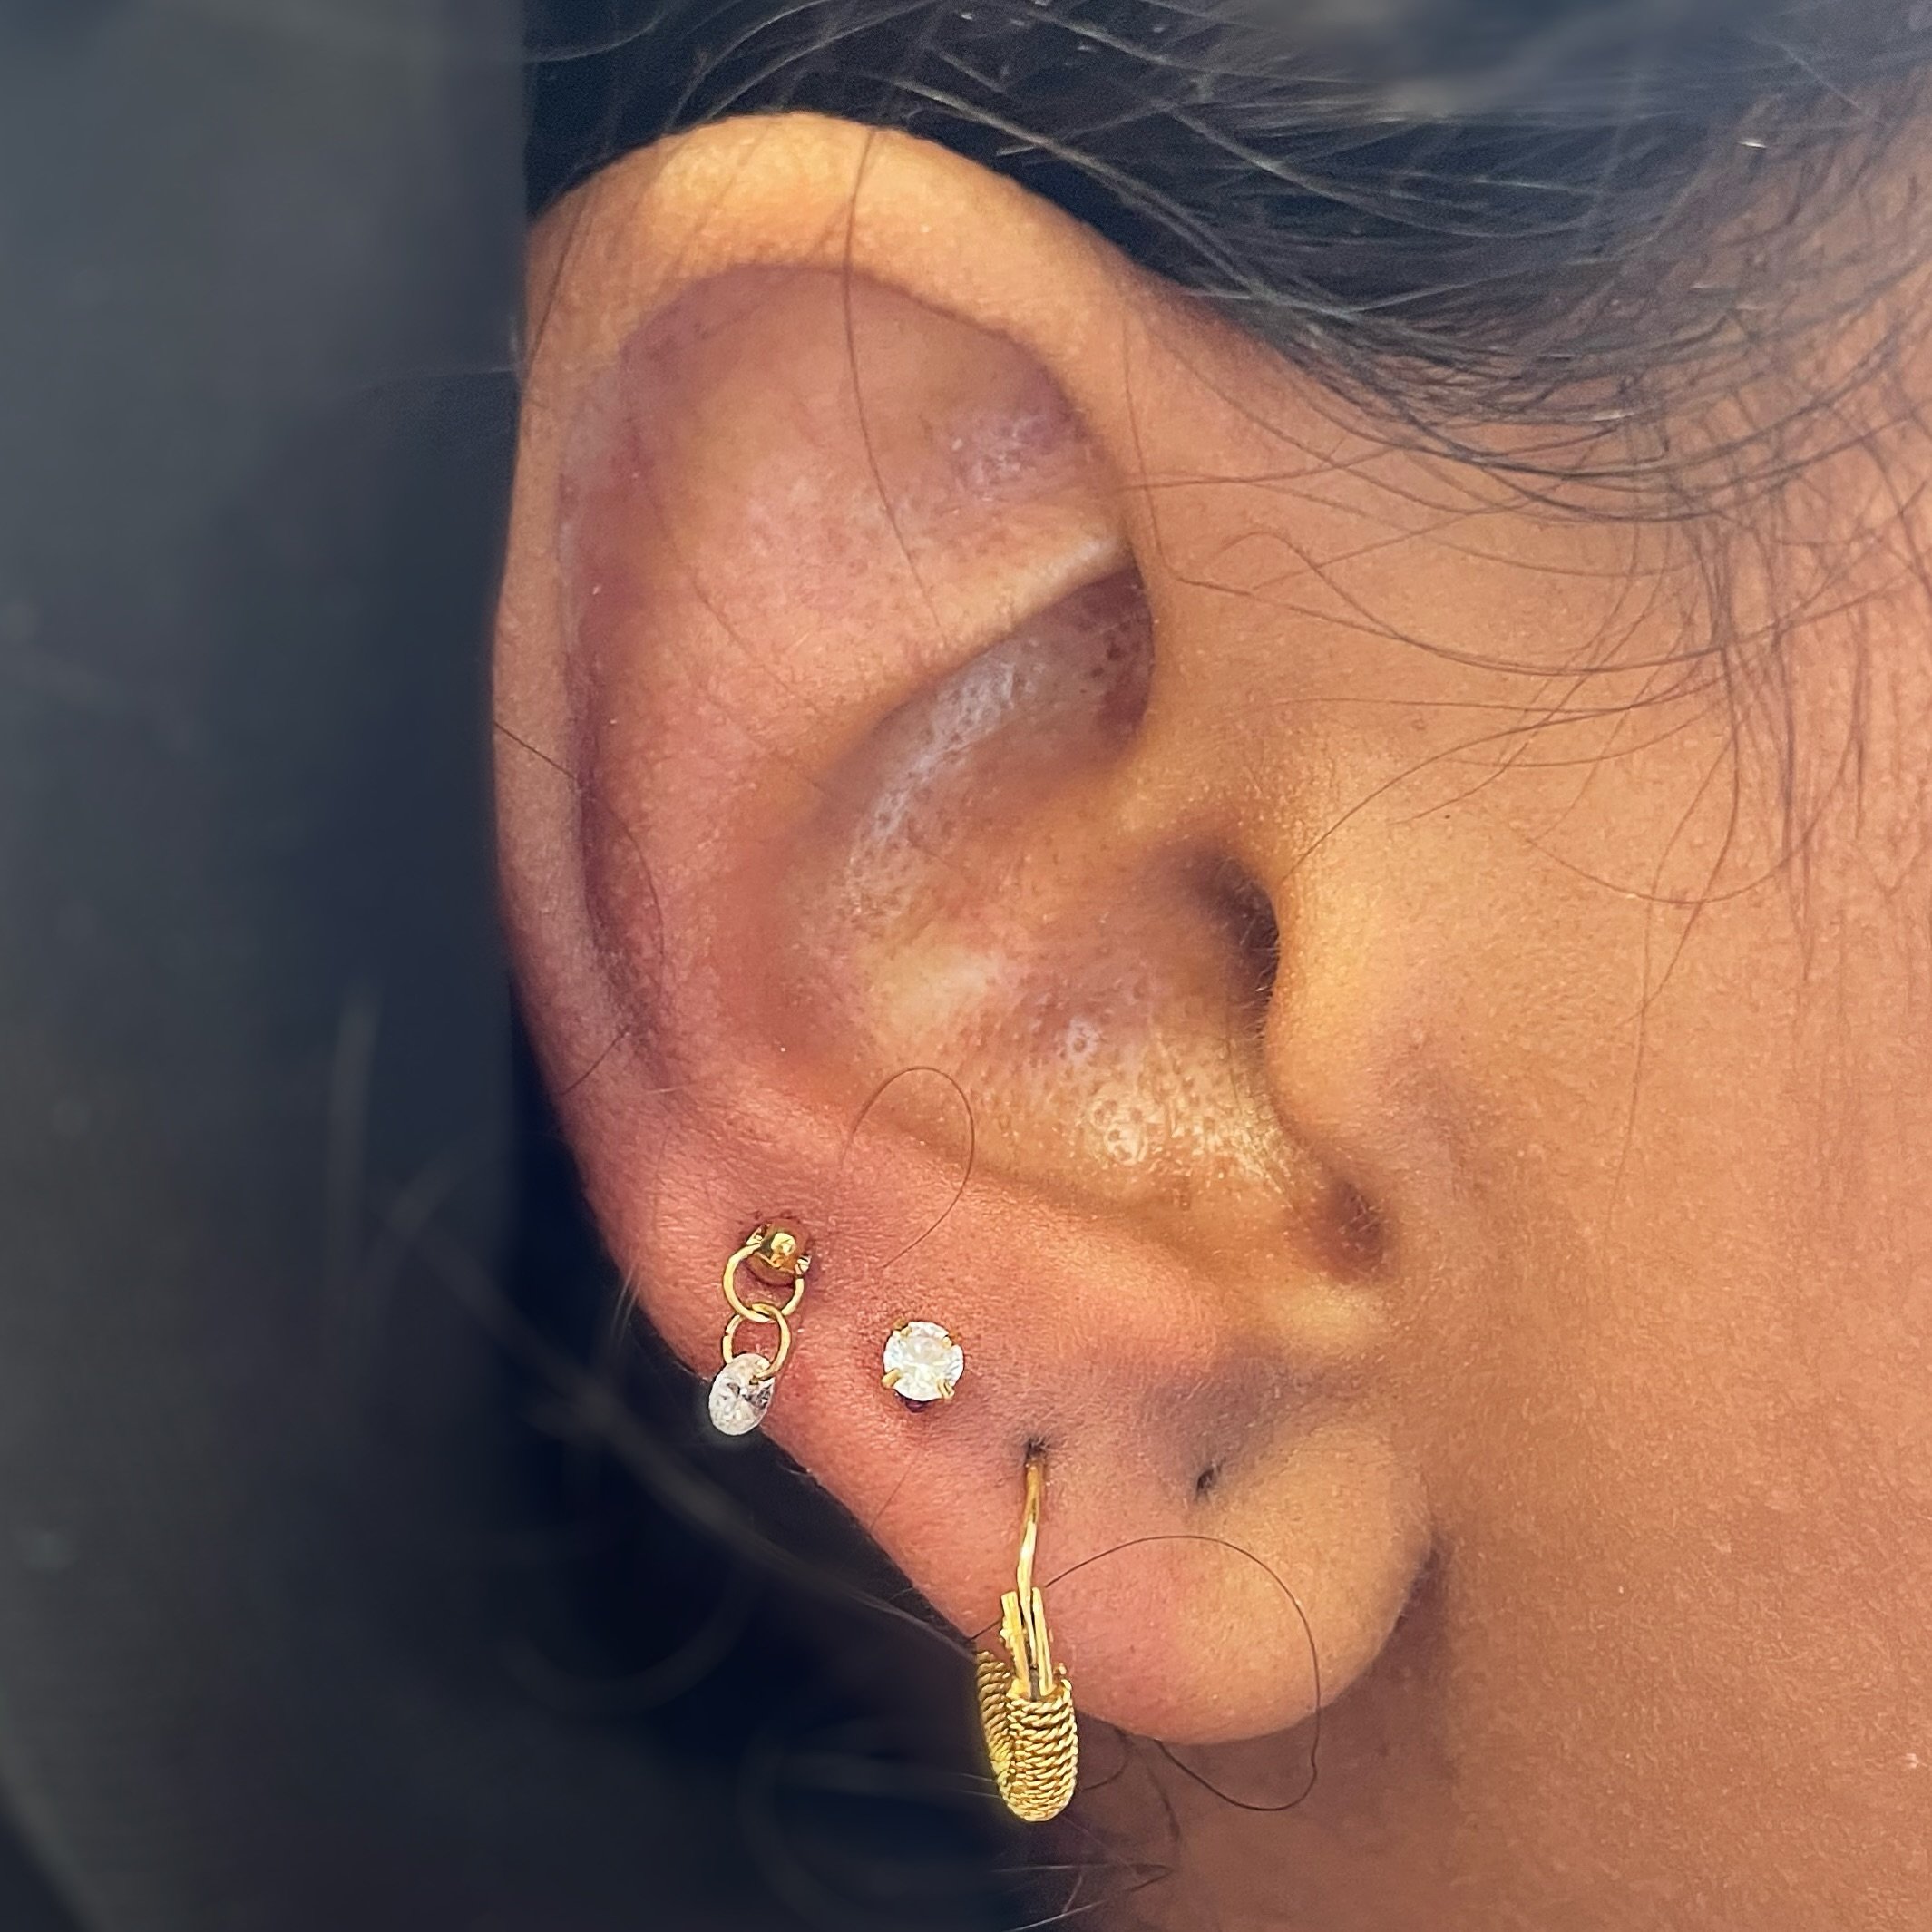 Ear Piercings 👂🏻💍

Two new upper lobe additions to this ear. 
Dangling jewelry and gold stud. 

📓TO BOOK WITH VANASSA :
Send a or www.studiovanassa.com

📍Studio Vanassa
💌 vanassa@studiovanassa.com
💻 www.studiovanassa.com 
📞 780-297-8030

#edm